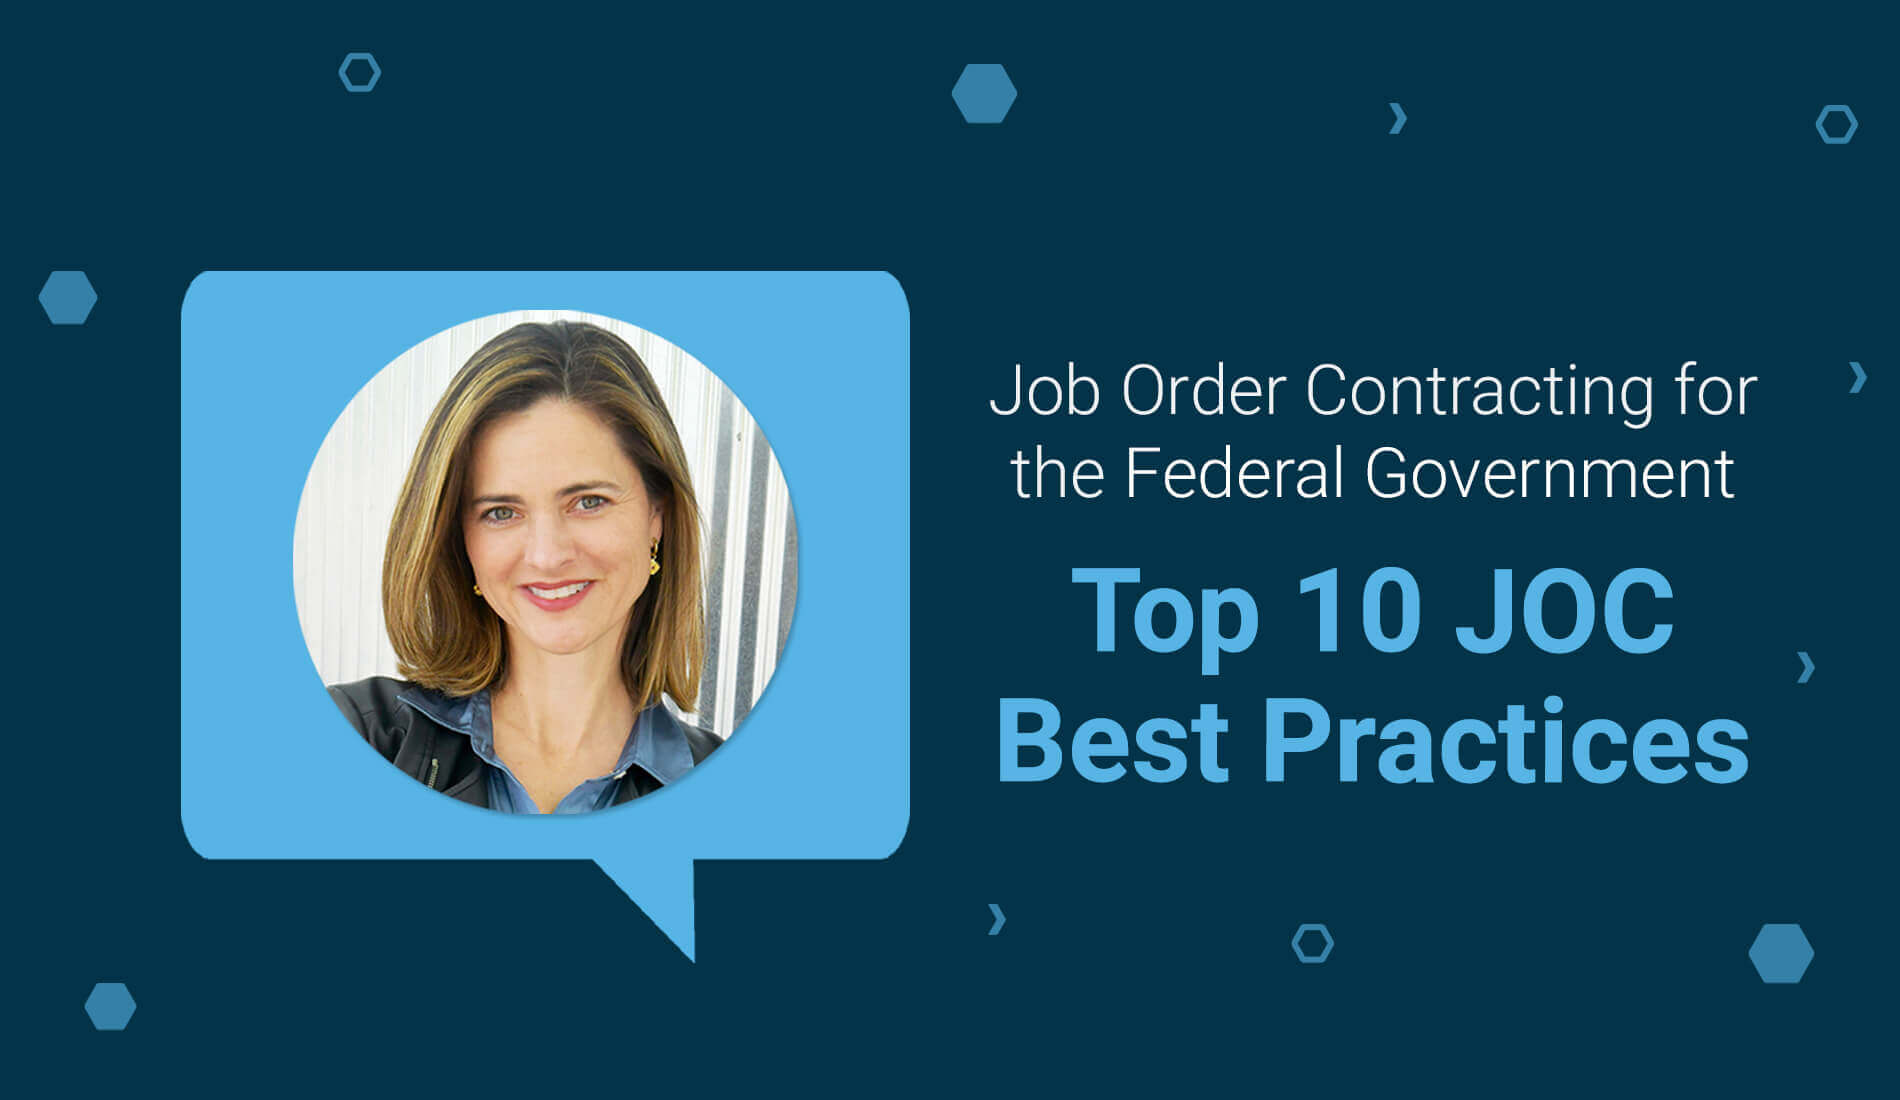 Top 10 JOC Best Practices for the Federal Space 5